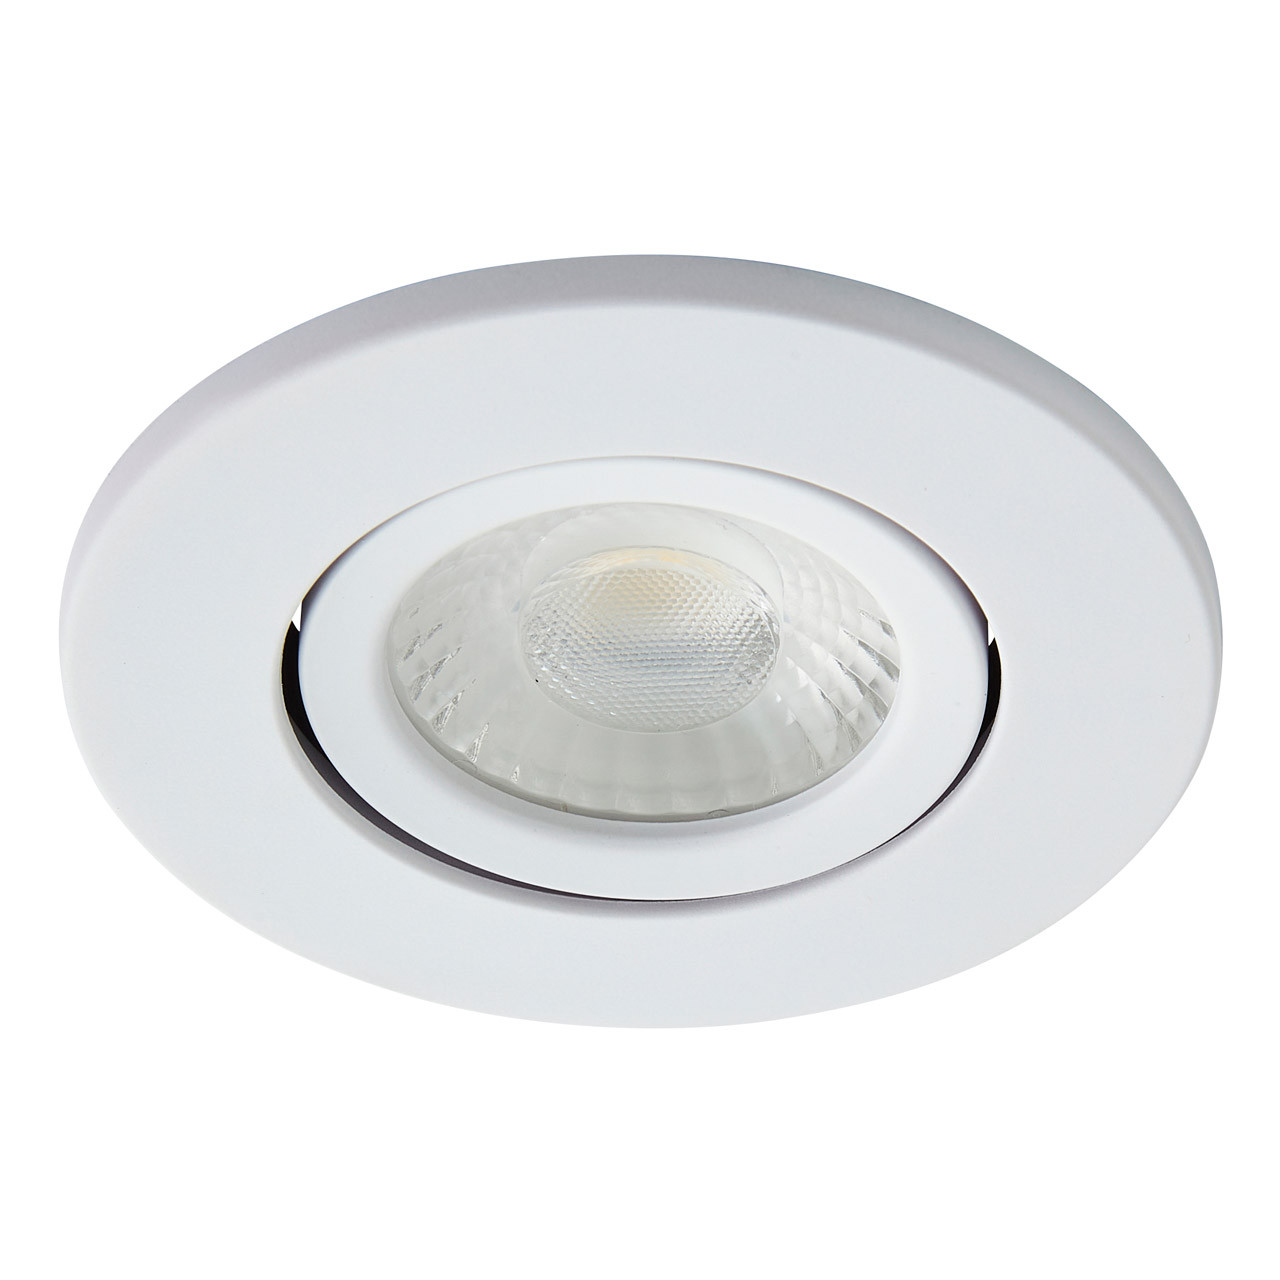 Photos - Chandelier / Lamp SPA Como LED Tiltable Fire Rated Downlight 5W Dimmable Cool White Matt Whi 